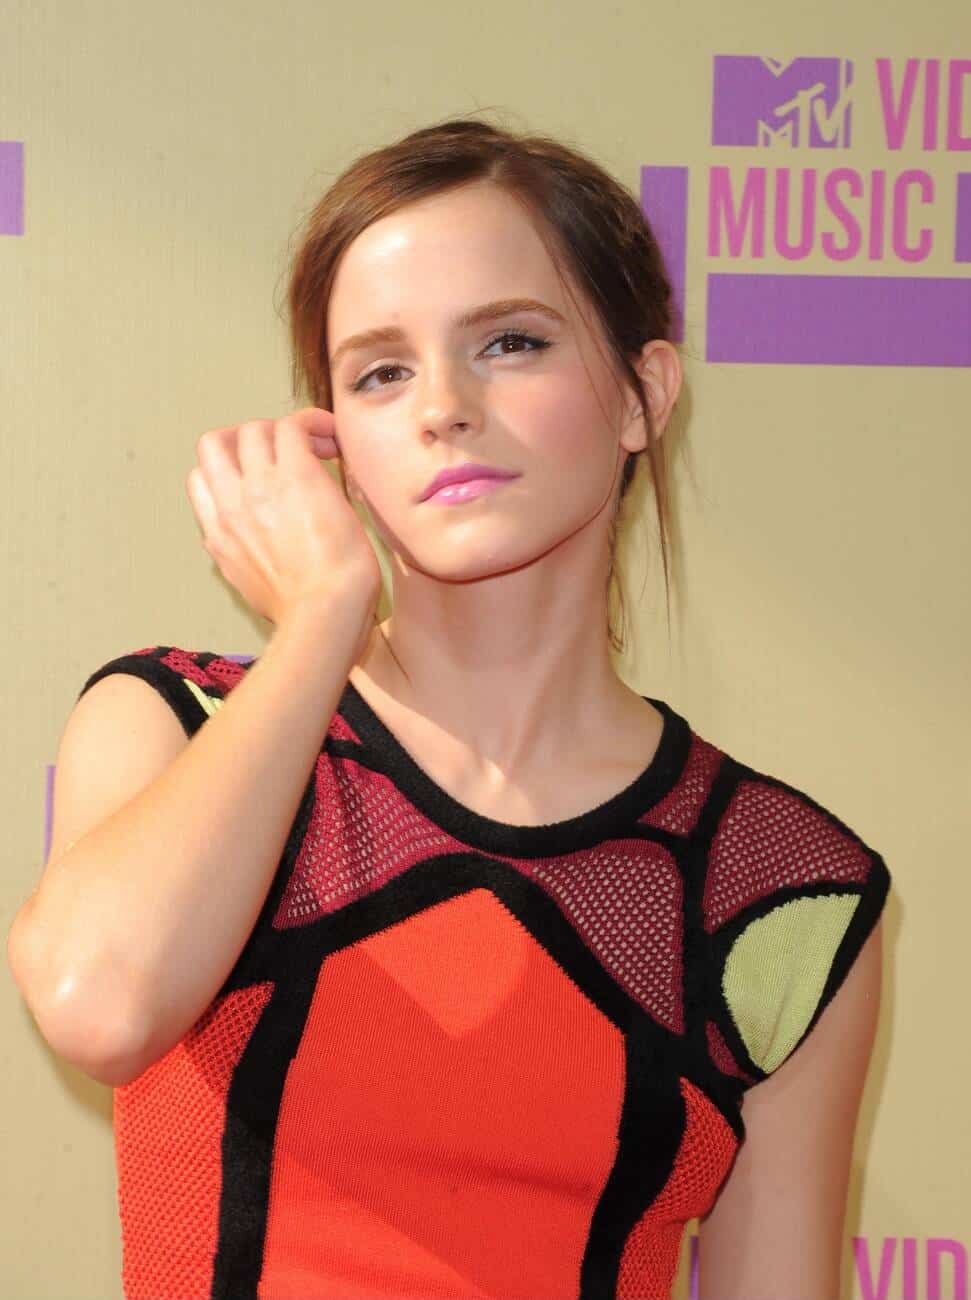 Emma Watson Wore a Colorful Top and Short Skirt at MTV Video Music Awards